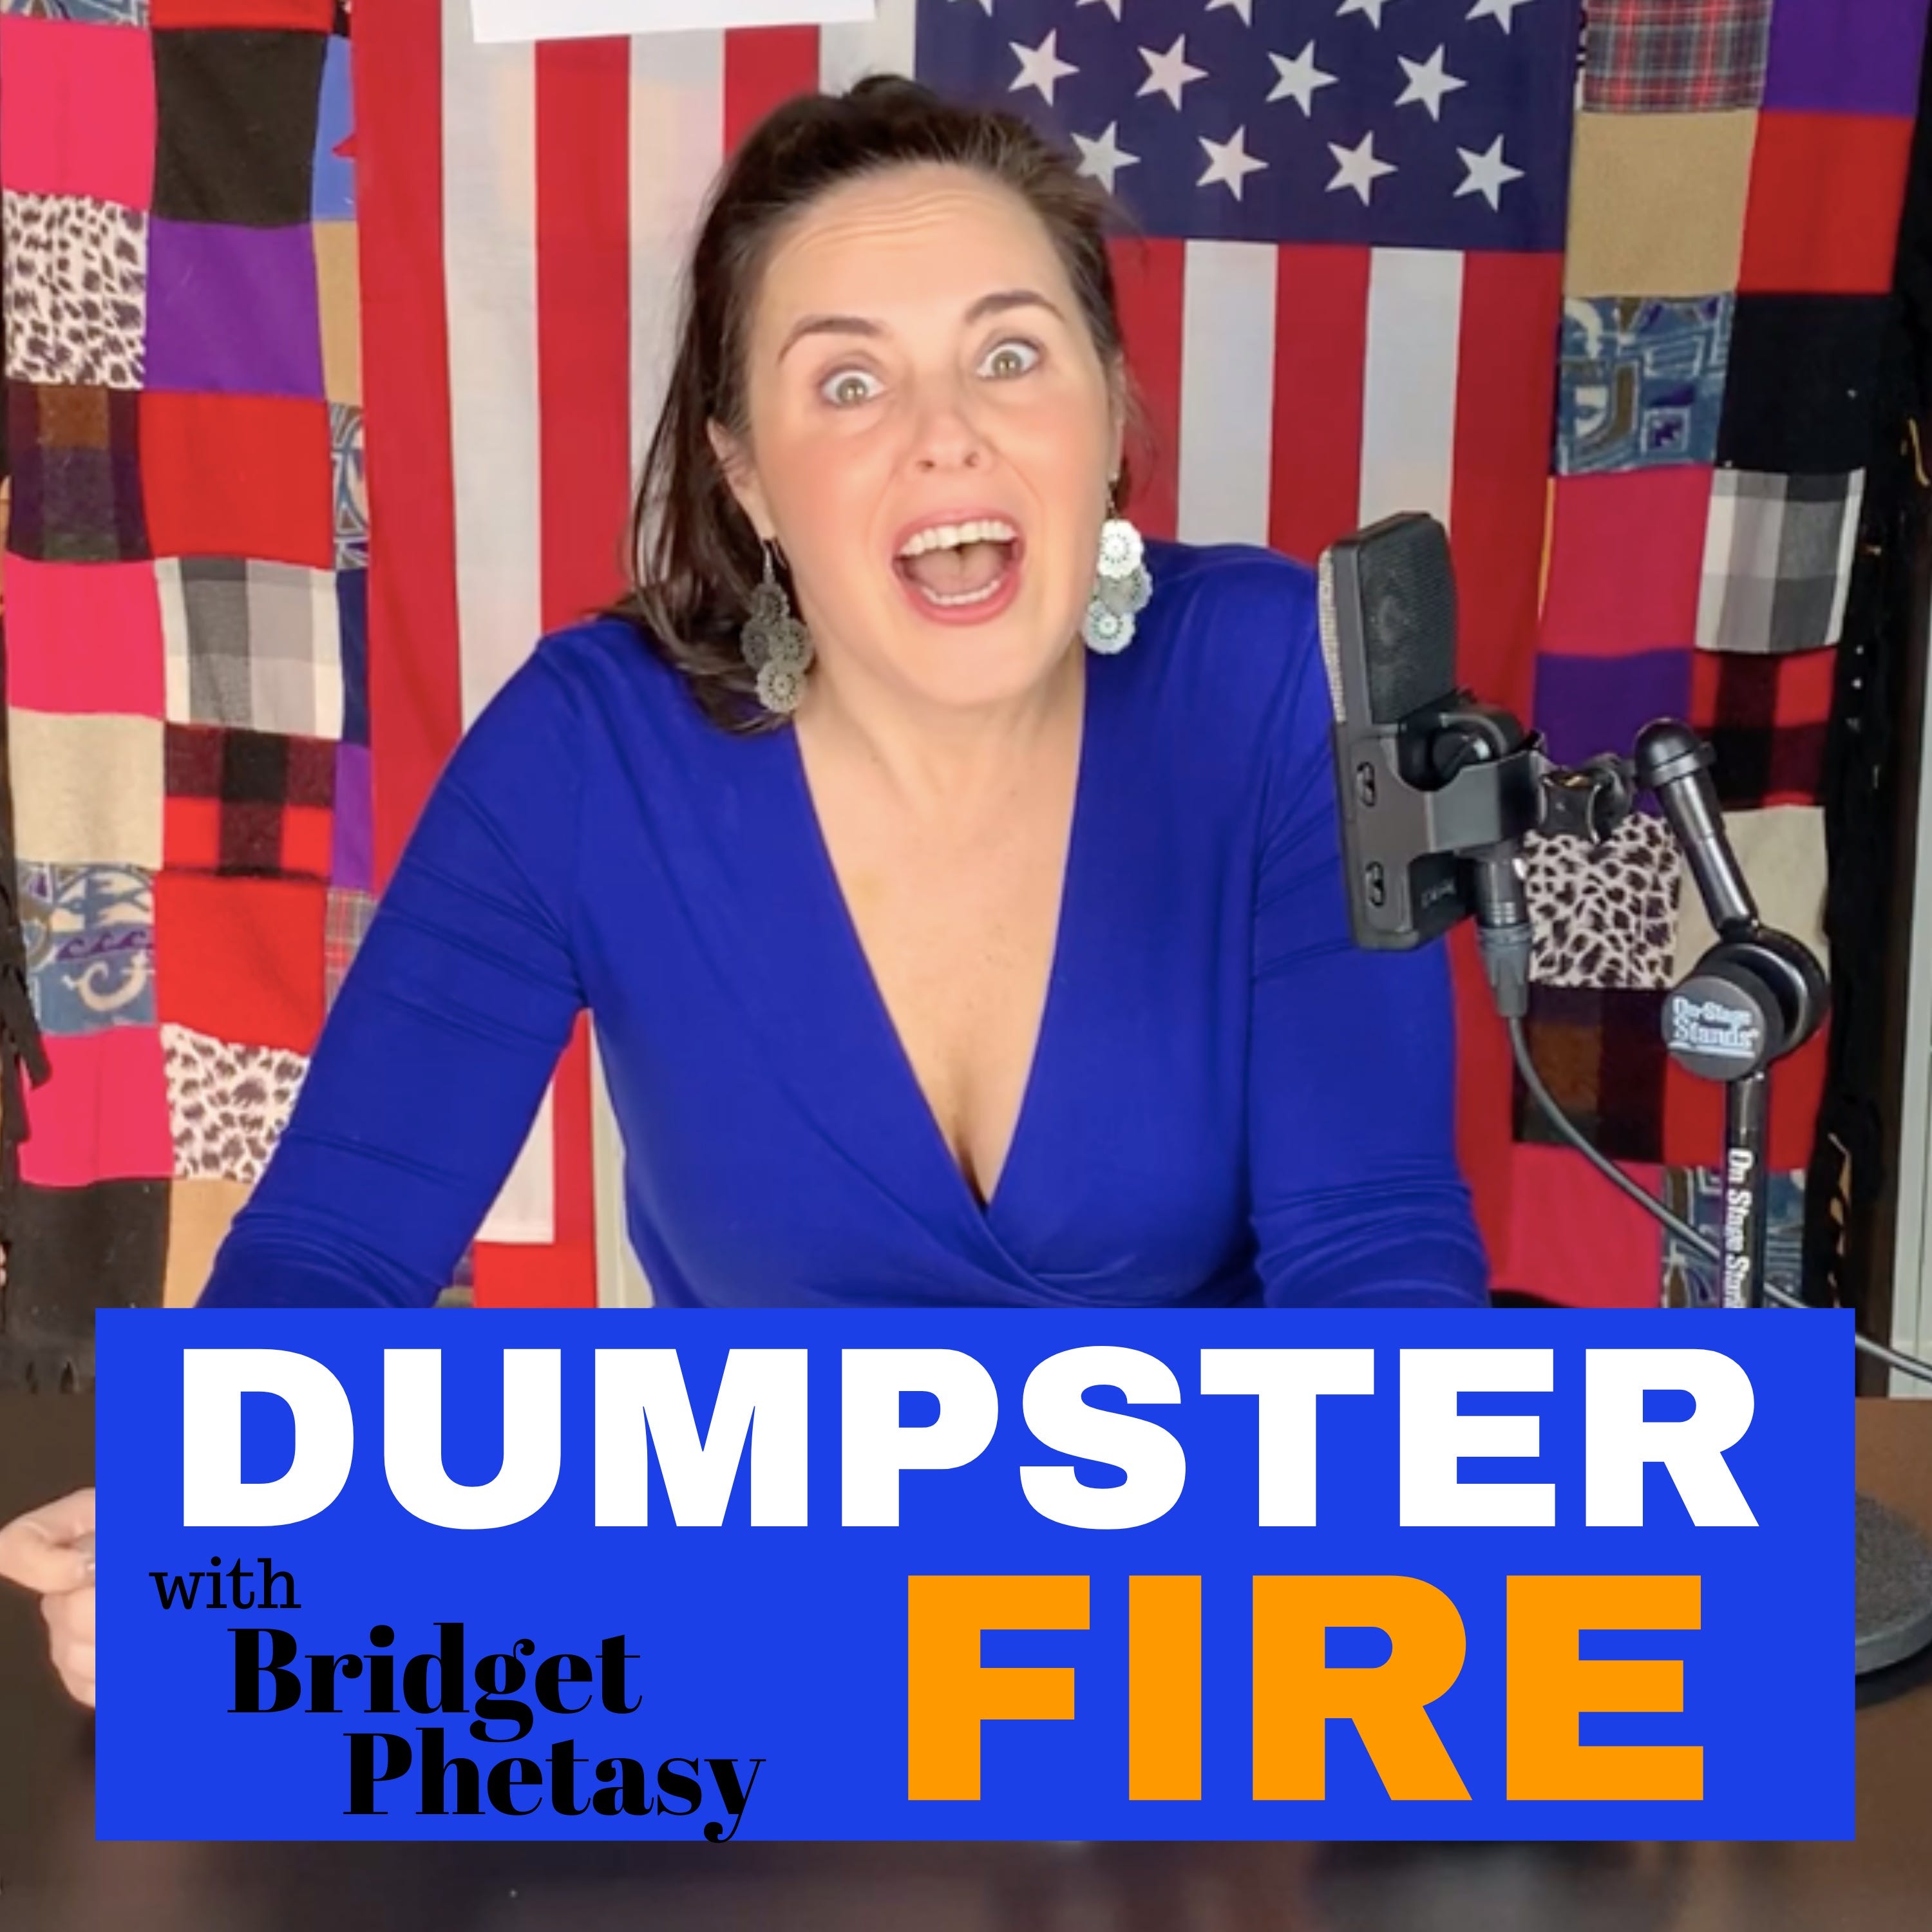 Dumpster Fire 13 - Pu$$y, The Musical